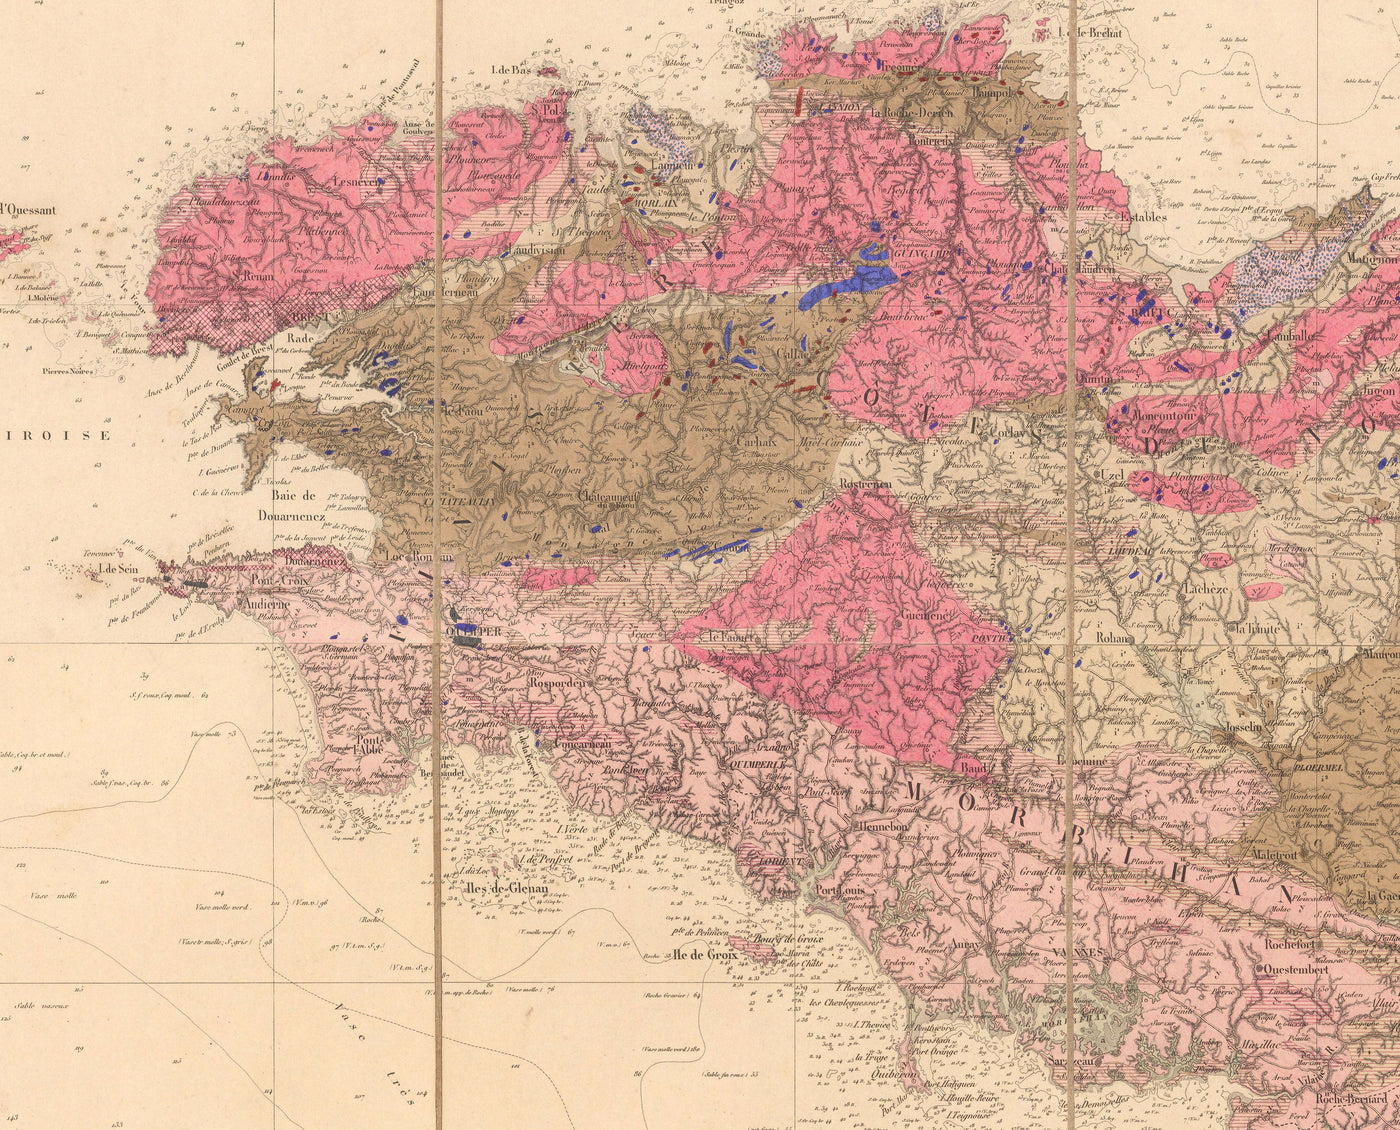 Old Geological Map of France, 1840 by André Brochant de Villiers - Western Europe, Belgium